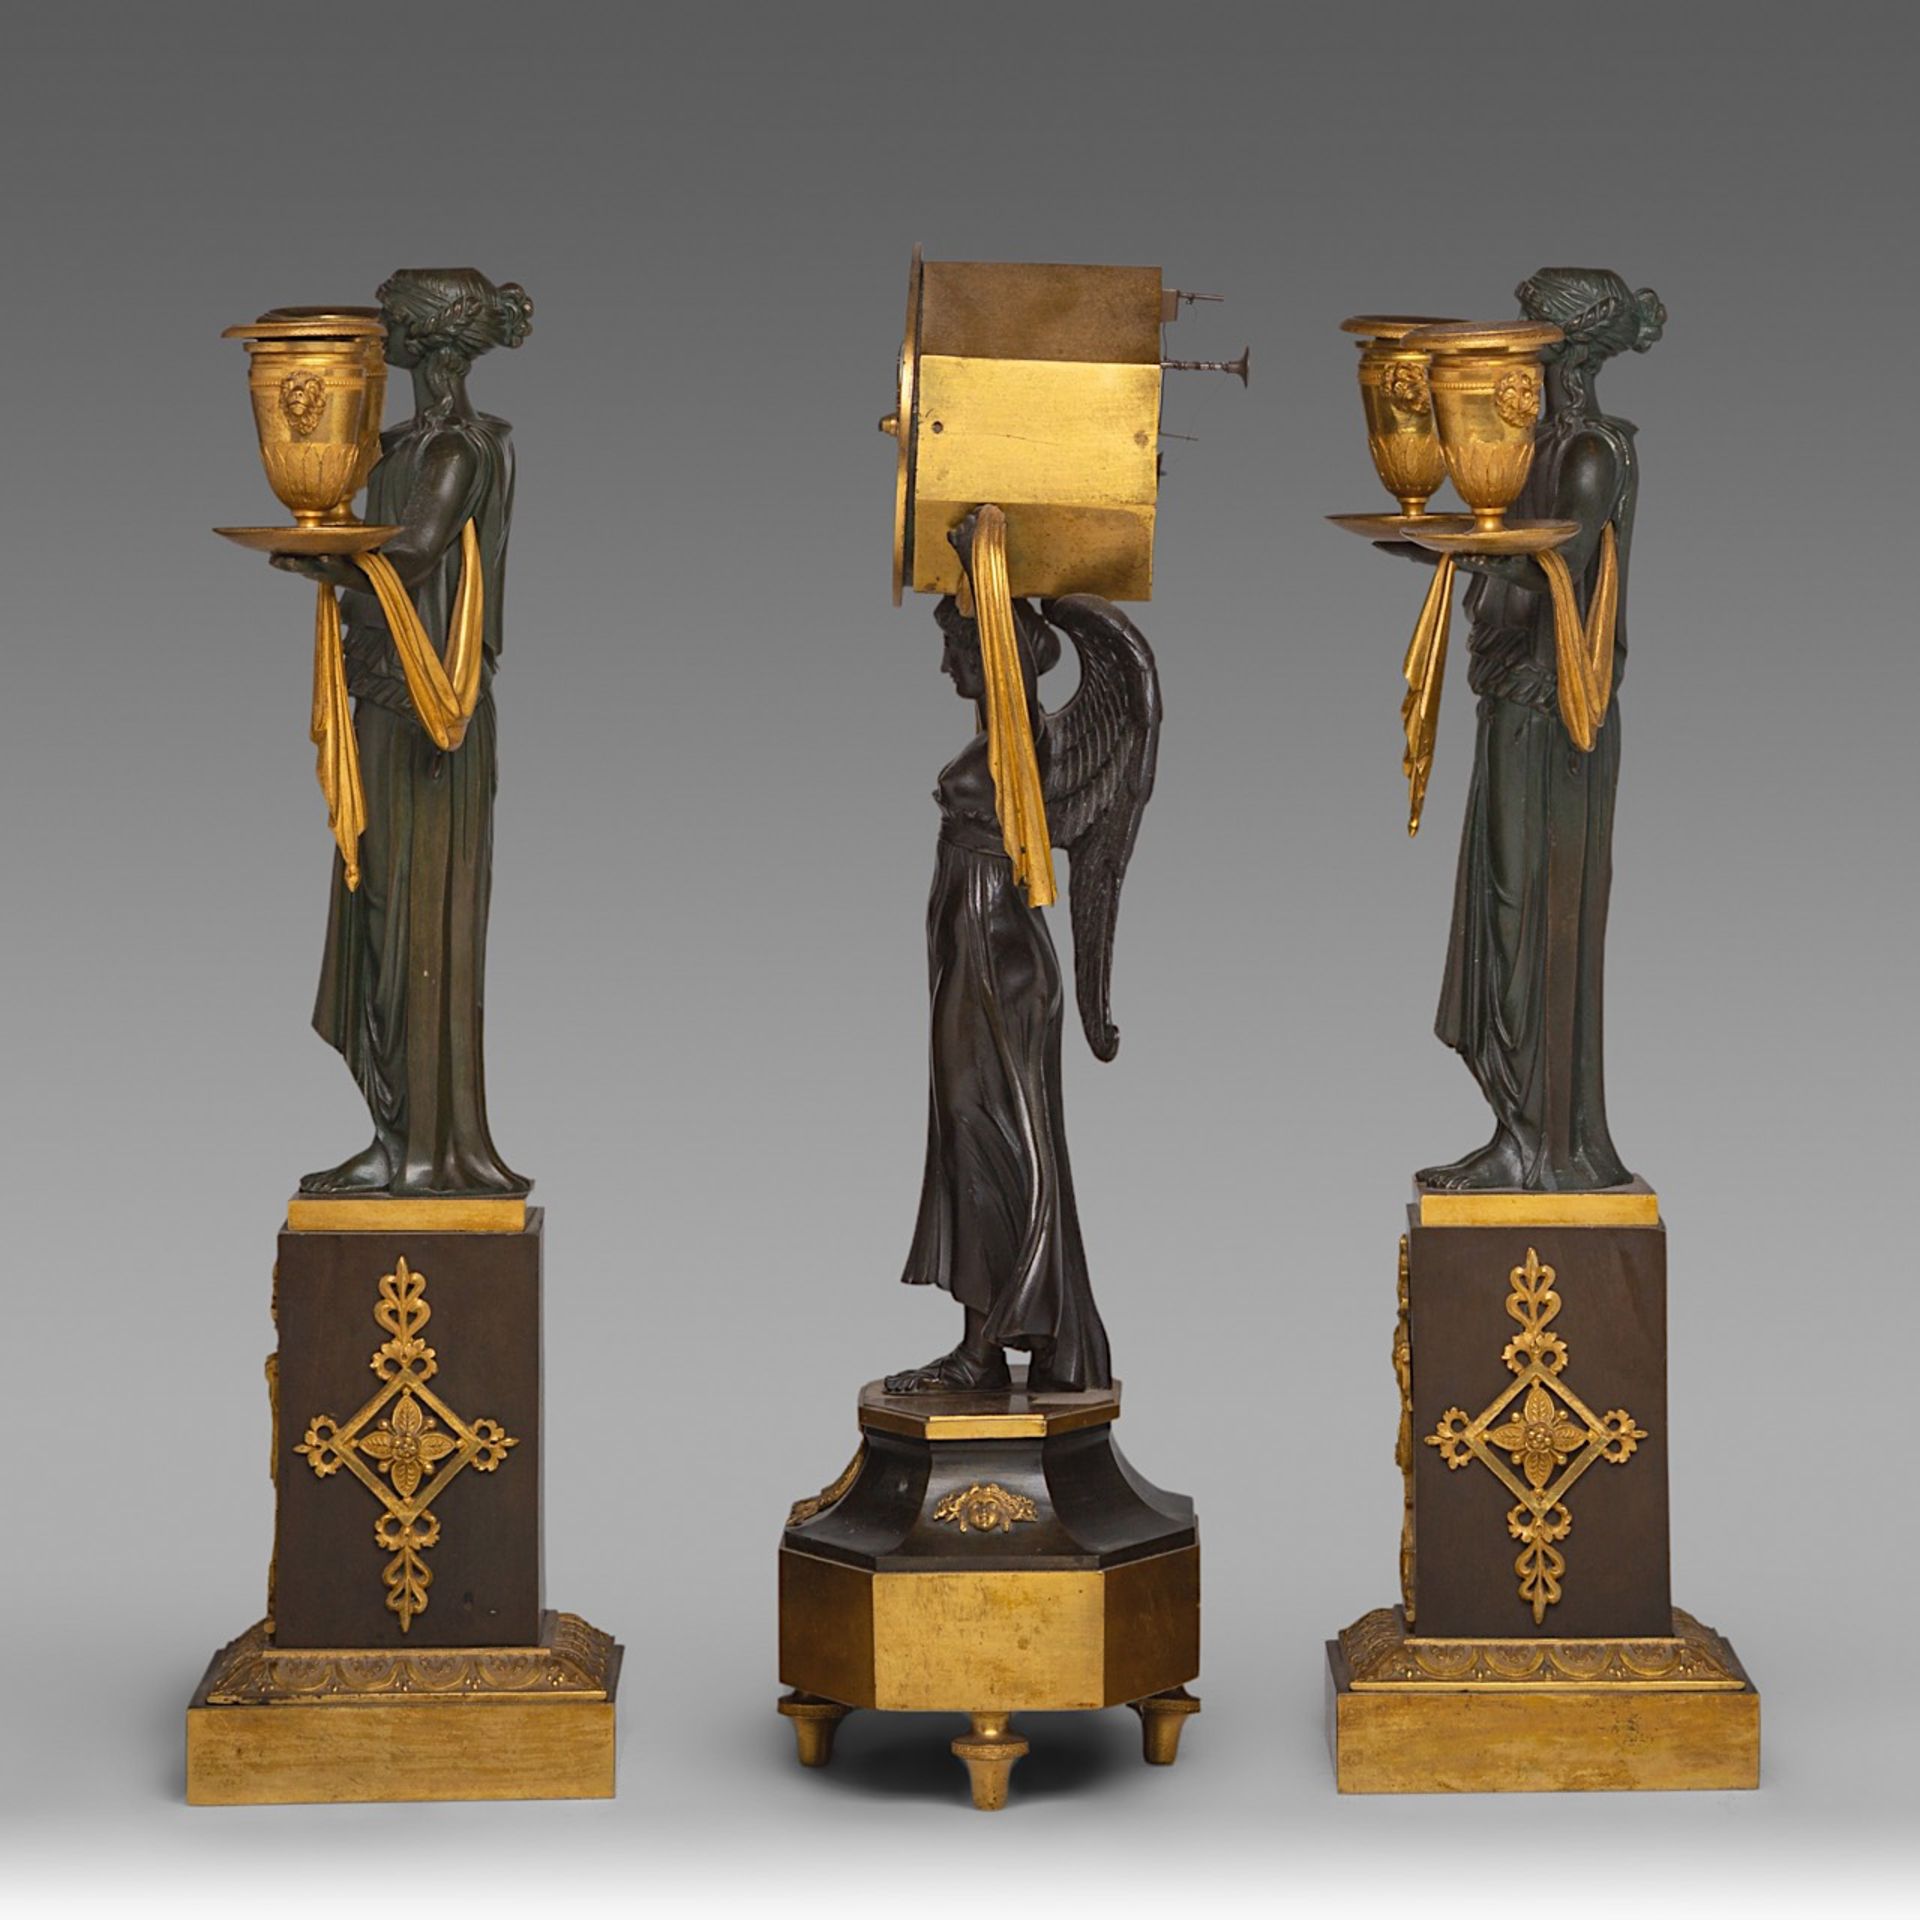 An Empire figural mantle clock, and two matching candelabras, H 43 - 44 cm - Image 2 of 6